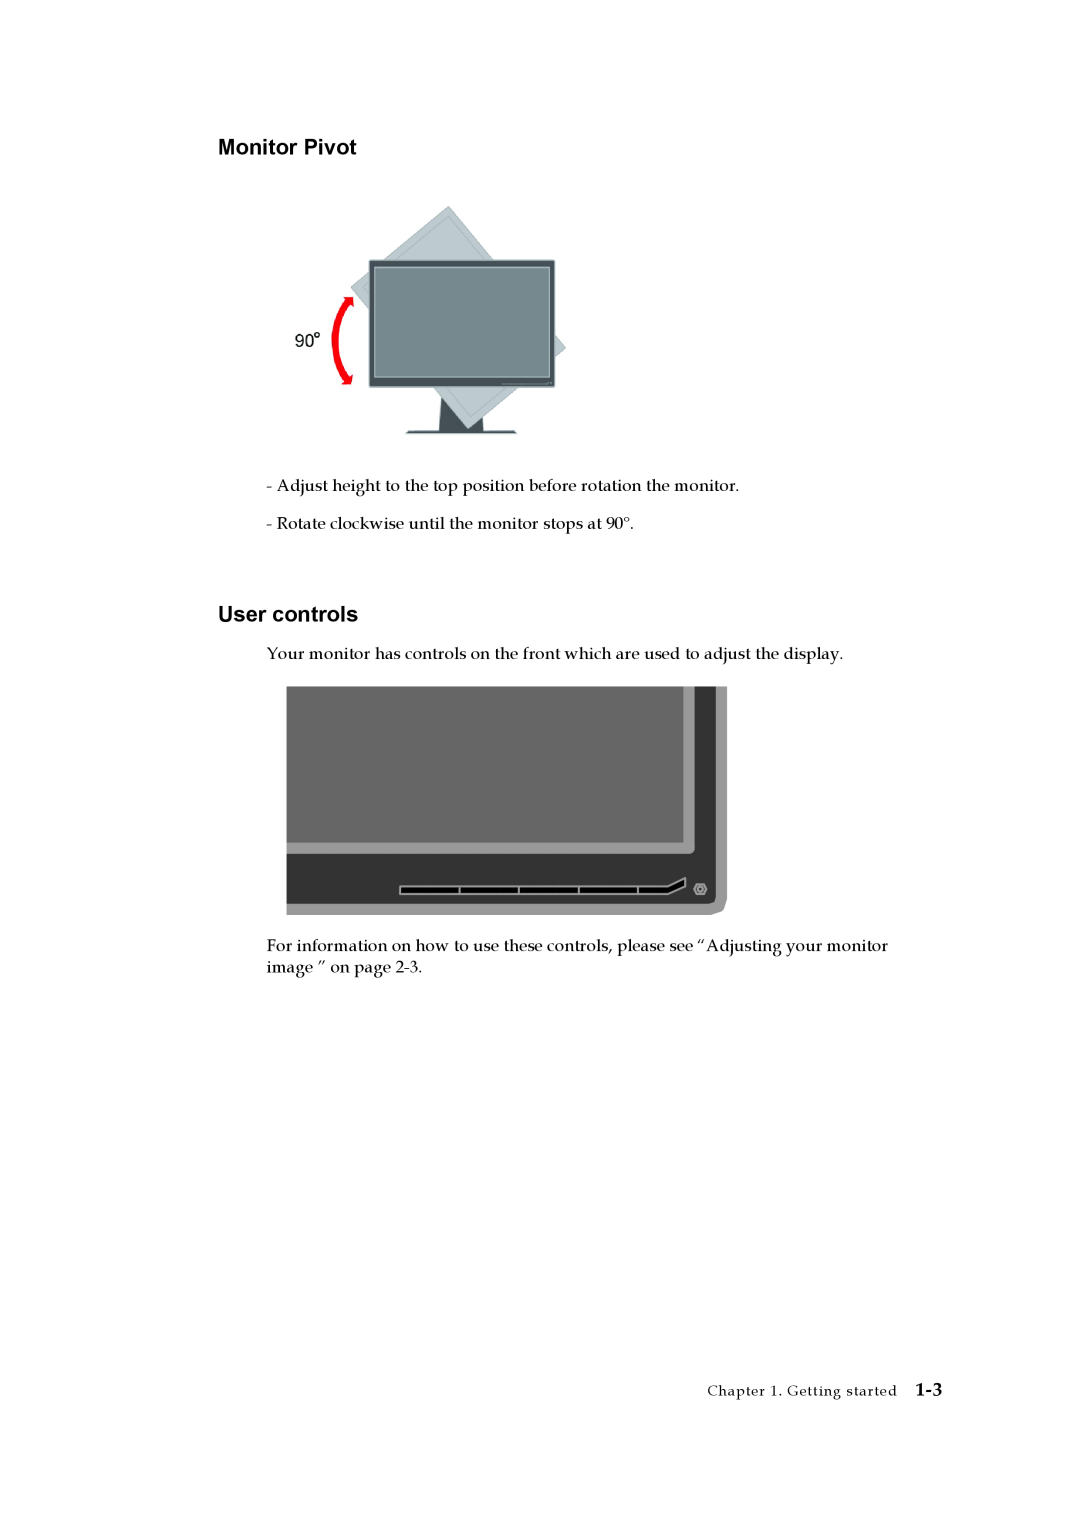 Lenovo L2251p manual Monitor Pivot, User controls, Adjust height to the top position before rotation the monitor 